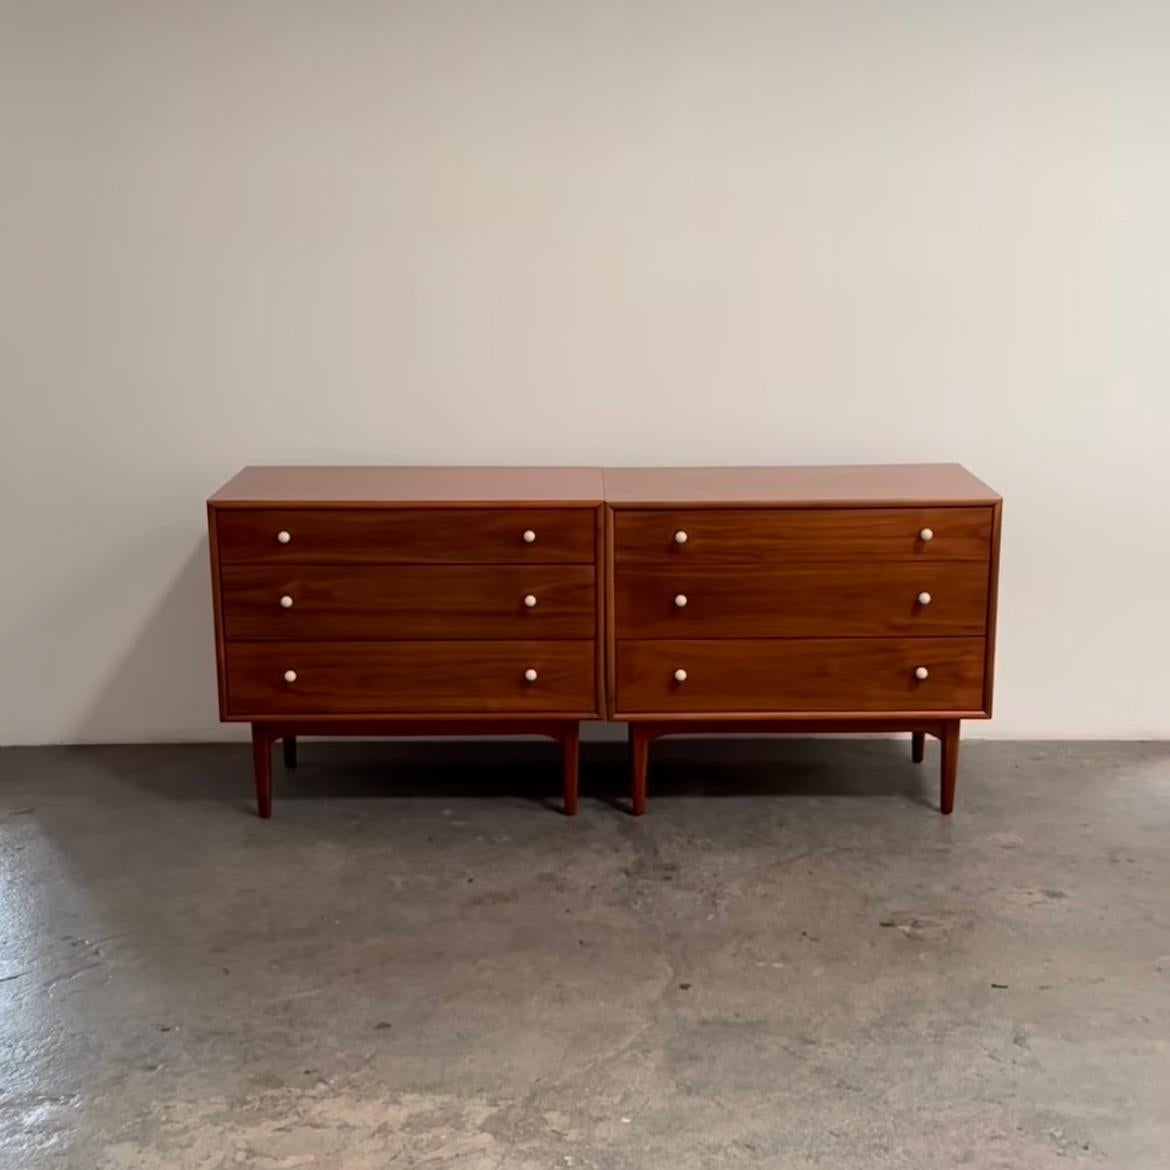 This midcentury dresser was designed by Kipp Stewart Jr. for Drexel in the 1960s. It was created as part of the Drexel Declaration Collection. A mix of Shaker, Danish, and American modern sensibilities, these pieces have a timeless quality that